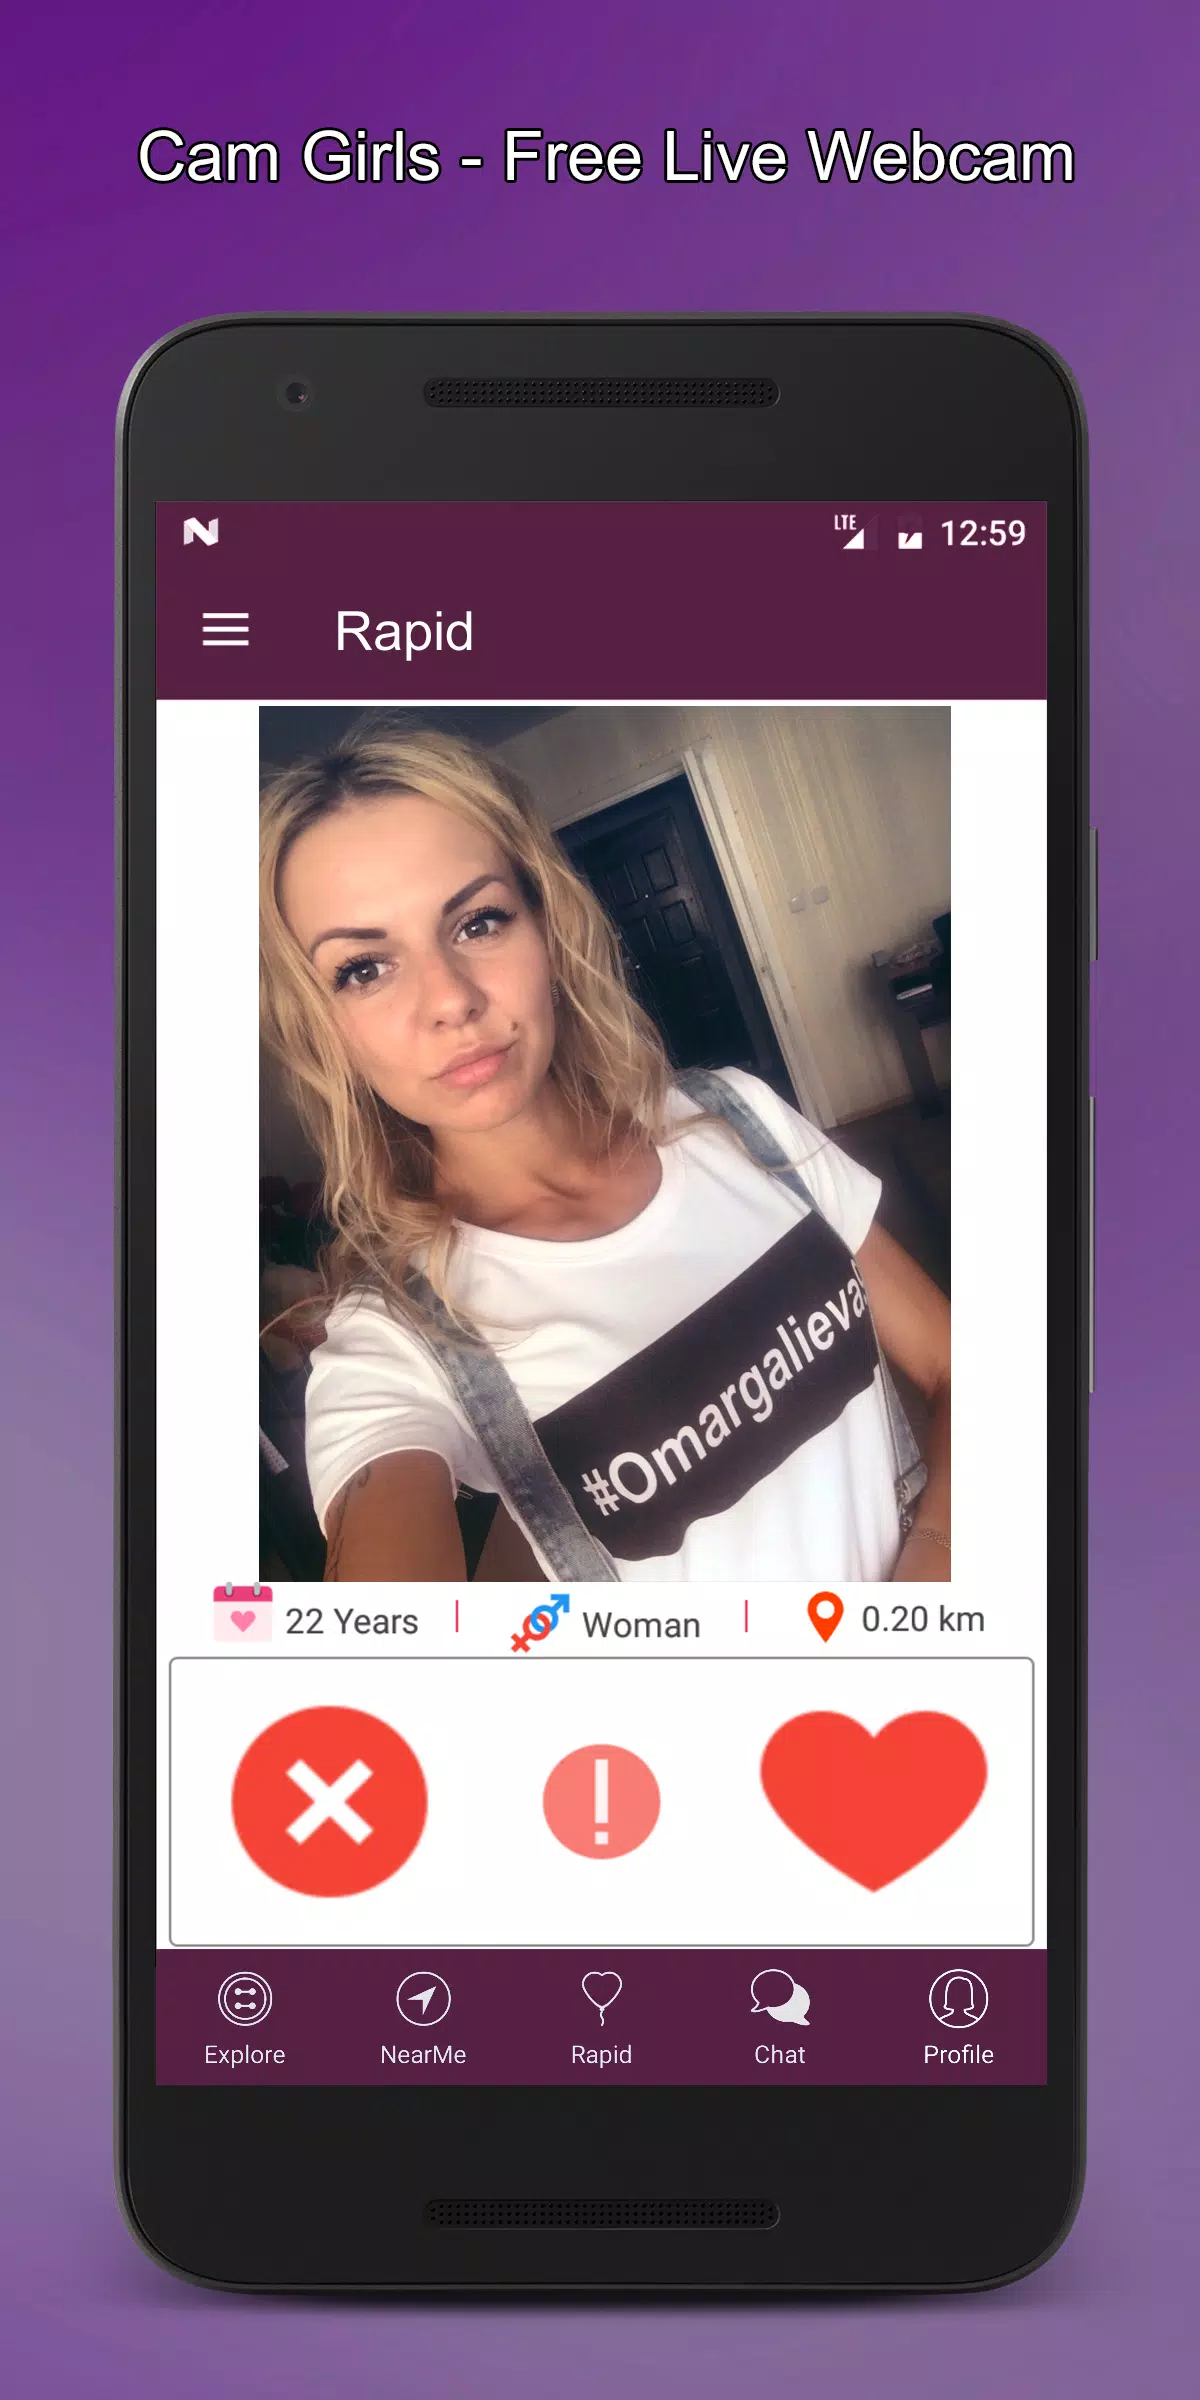 Cam Girls - Free Live Webcam for Android - APK Download